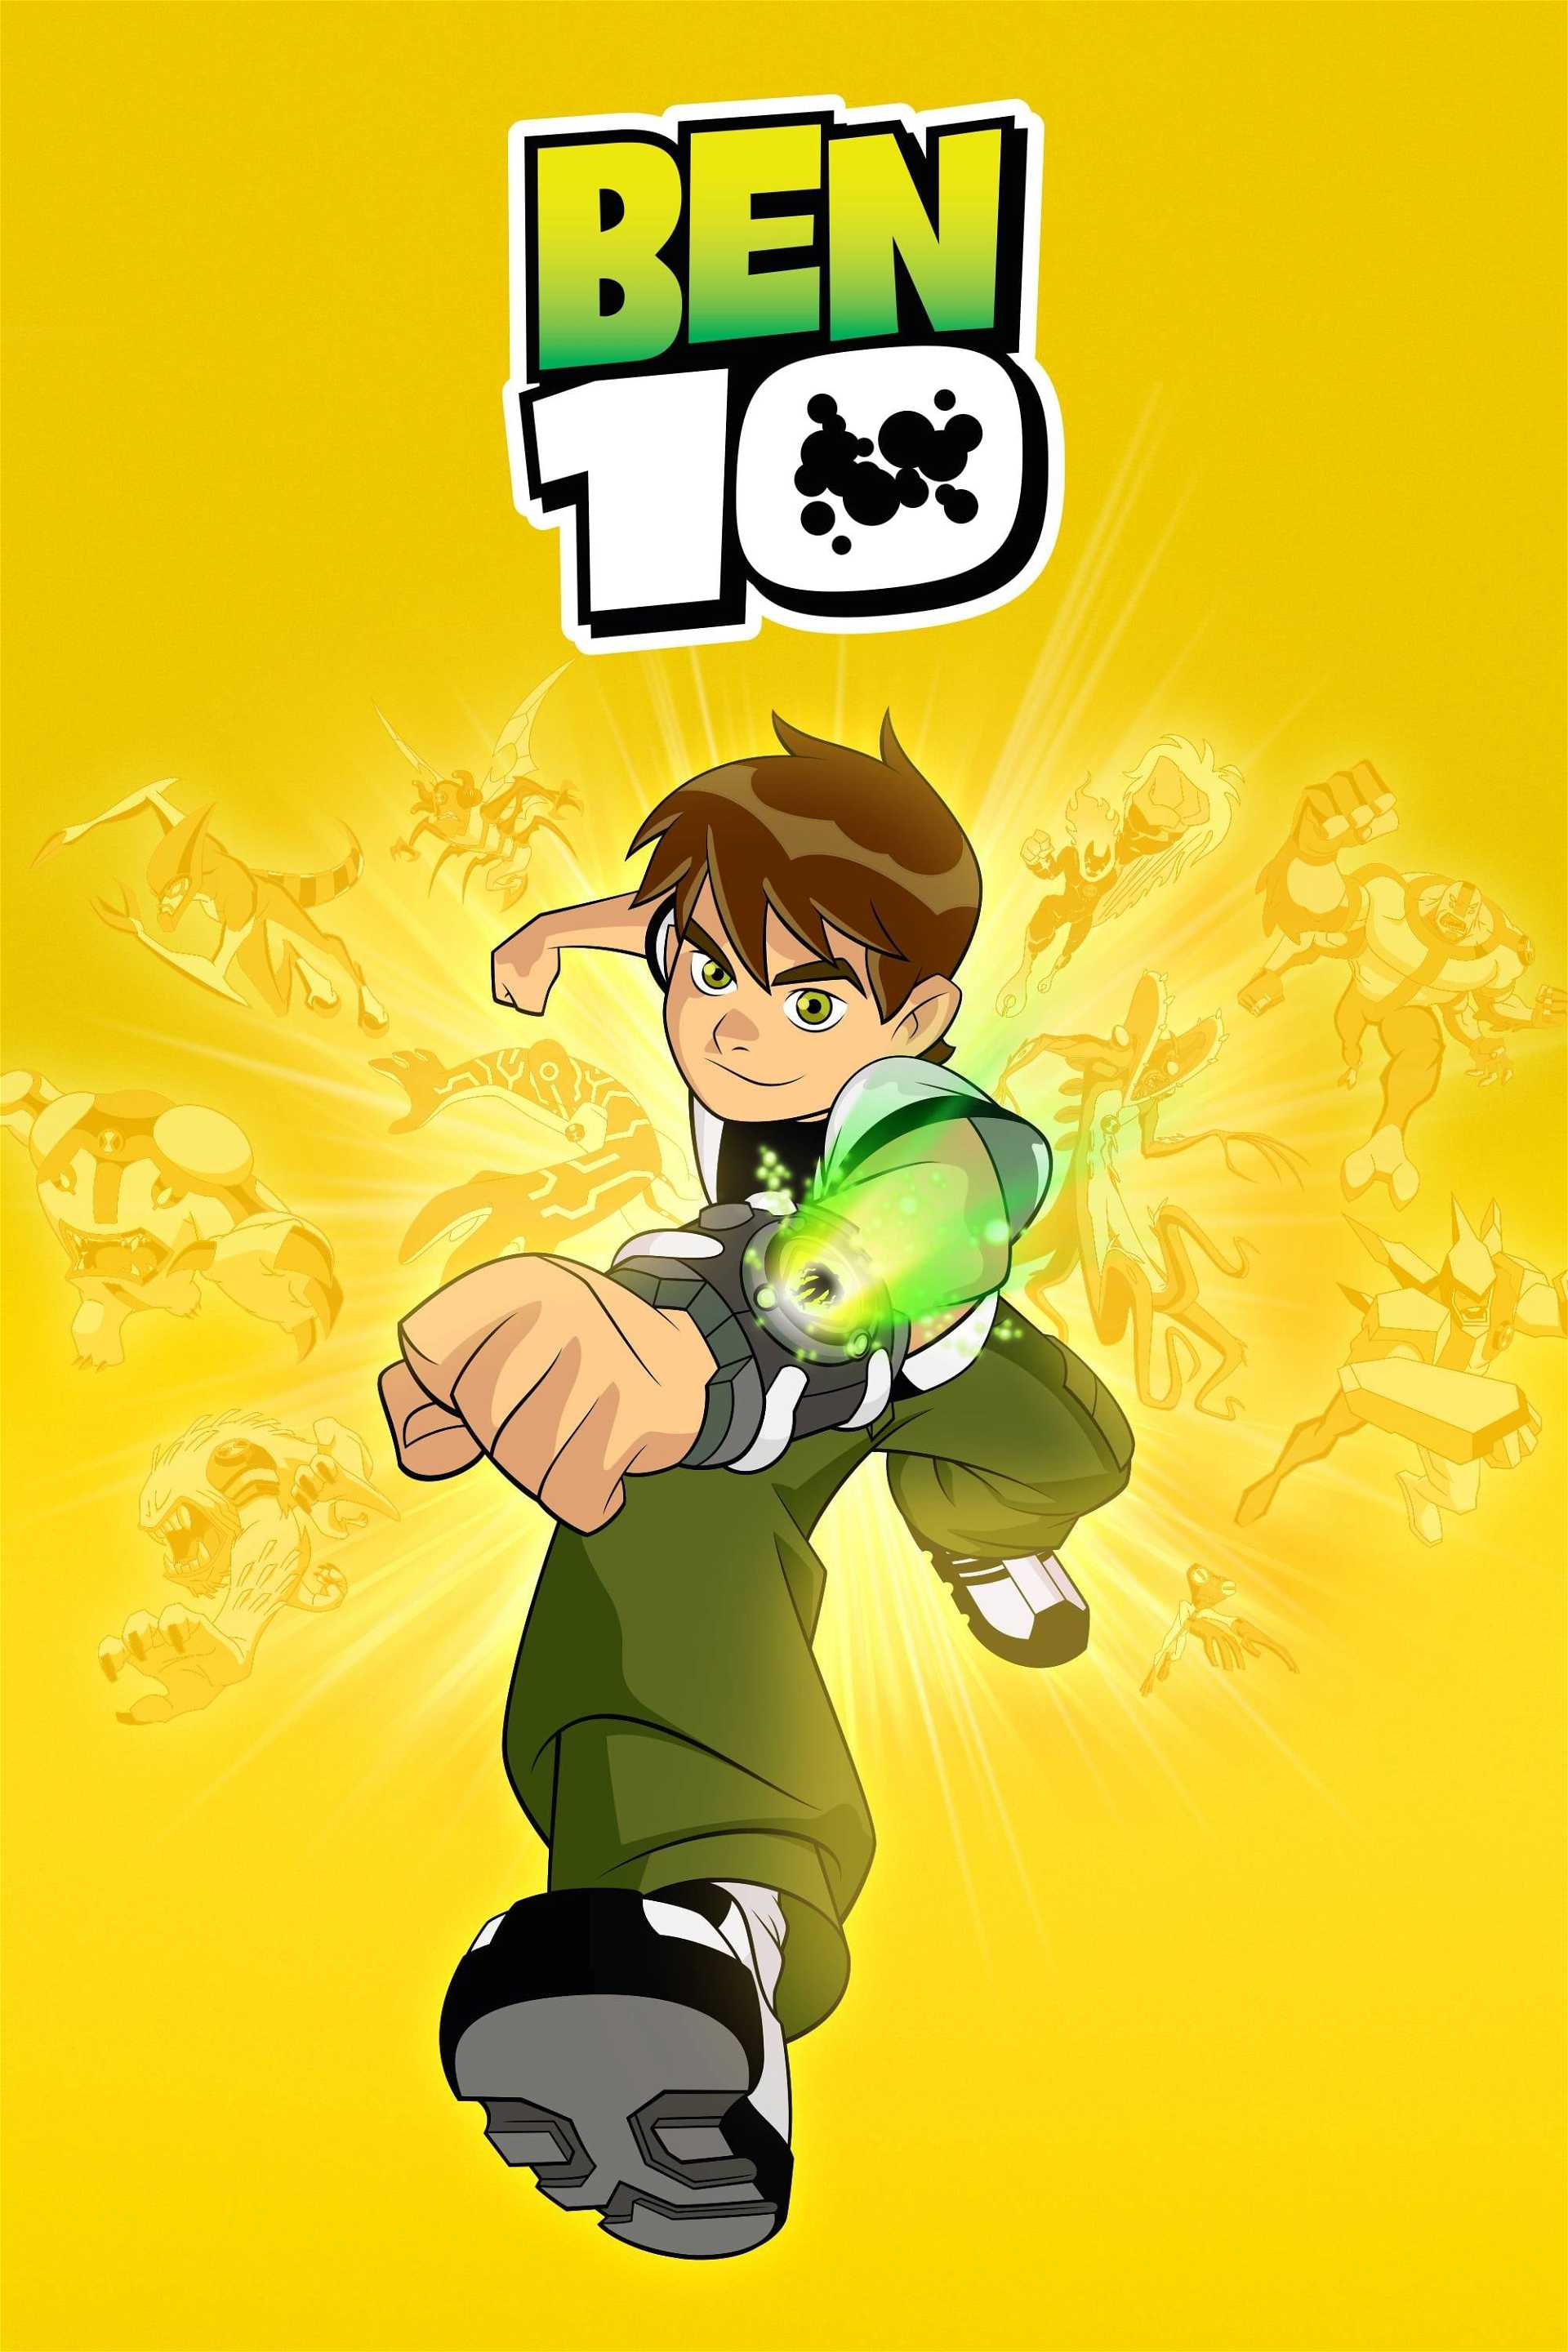 Ben 10 Classic in streaming